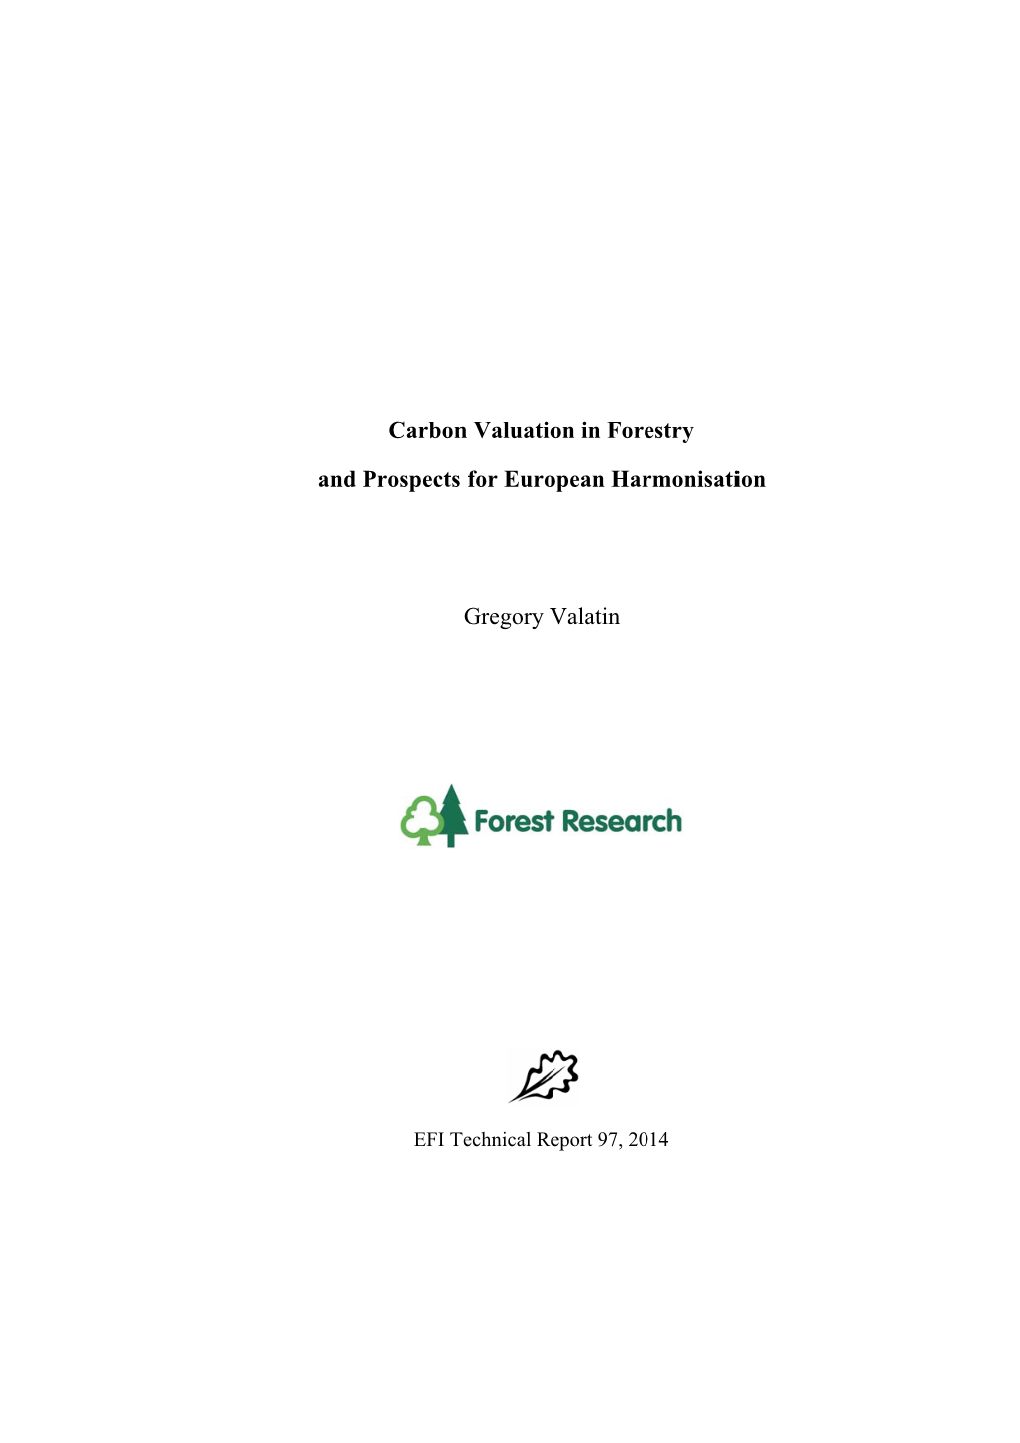 Carbon Valuation in Forestry and Prospects for European Harmonisation